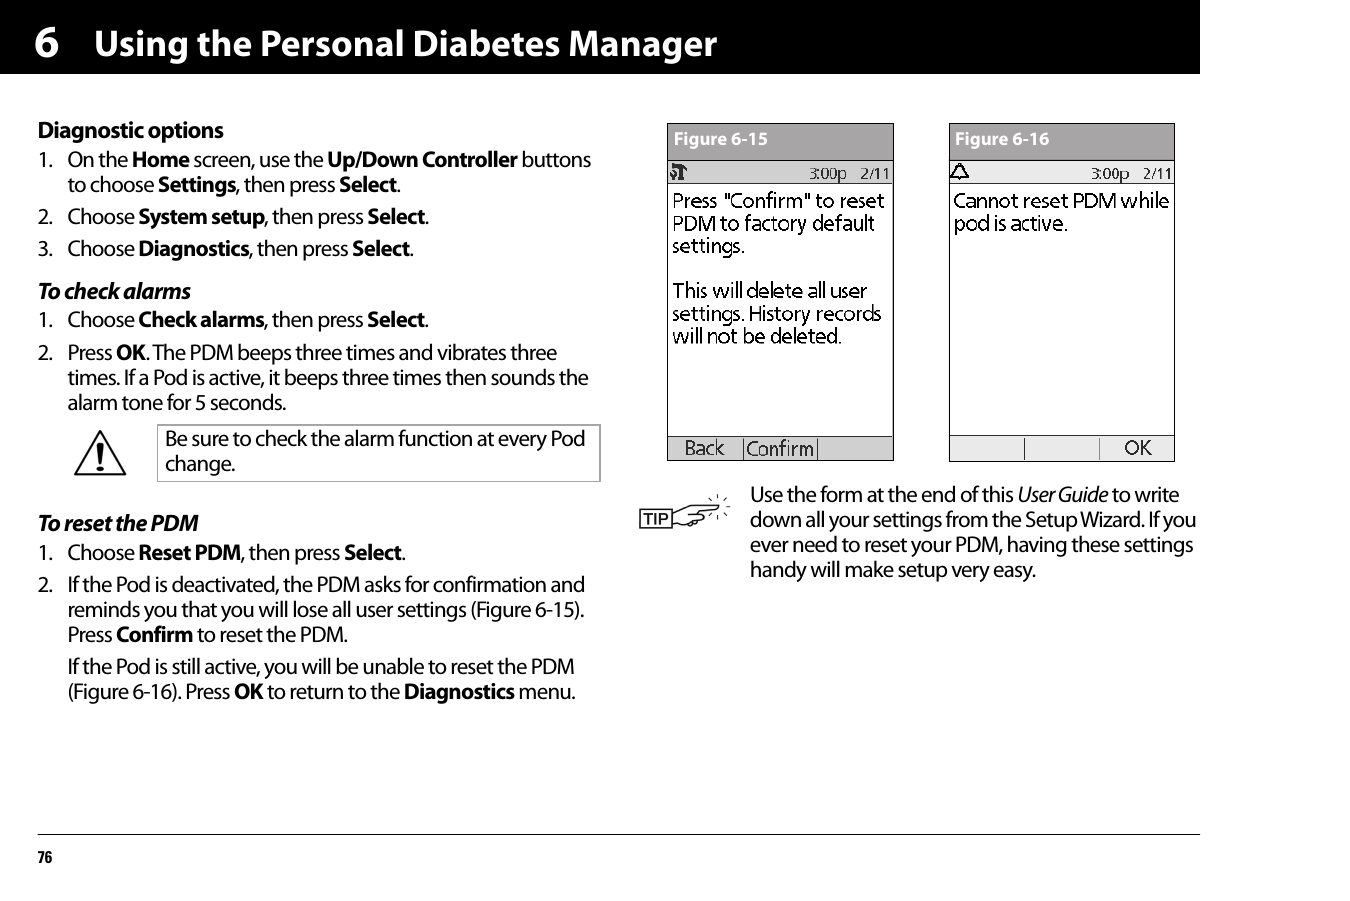 Using the Personal Diabetes Manager766Diagnostic options1. On the Home screen, use the Up/Down Controller buttons to choose Settings, then press Select.2. Choose System setup, then press Select.3. Choose Diagnostics, then press Select.To check alarms1. Choose Check alarms, then press Select.2. Press OK. The PDM beeps three times and vibrates three times. If a Pod is active, it beeps three times then sounds the alarm tone for 5 seconds.To reset the PDM1. Choose Reset PDM, then press Select.2. If the Pod is deactivated, the PDM asks for confirmation and reminds you that you will lose all user settings (Figure 6-15). Press Confirm to reset the PDM.If the Pod is still active, you will be unable to reset the PDM (Figure 6-16). Press OK to return to the Diagnostics menu.   Be sure to check the alarm function at every Pod change.Use the form at the end of this User Guide to write down all your settings from the Setup Wizard. If you ever need to reset your PDM, having these settings handy will make setup very easy.Figure 6-15 Figure 6-16